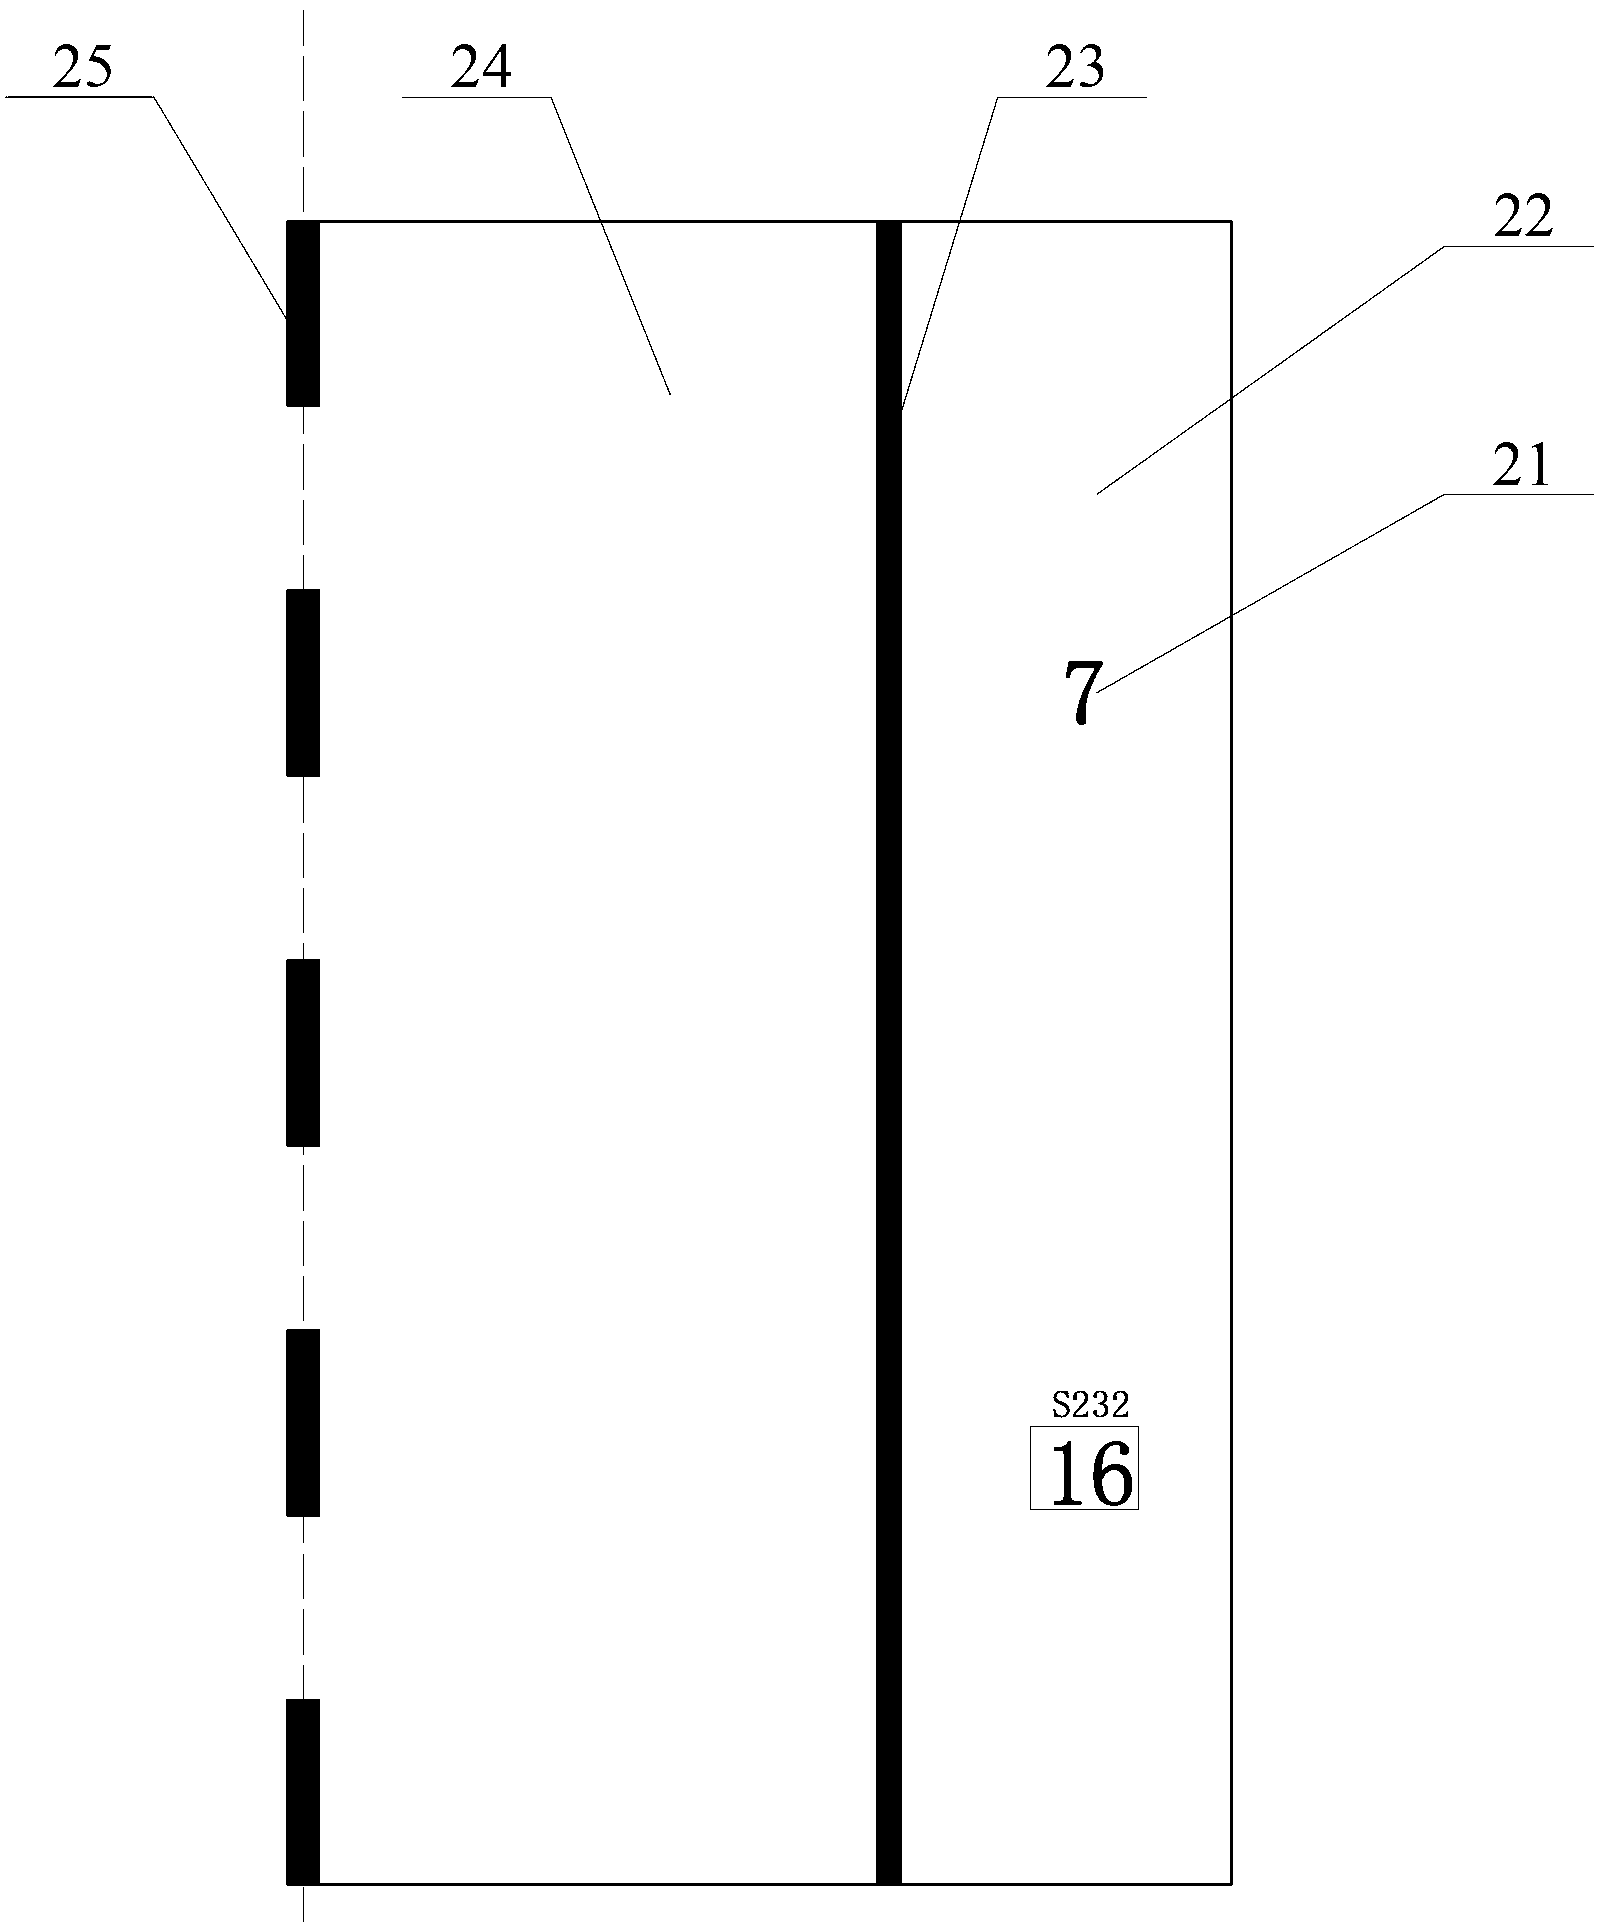 Highway, hectometer stake and construction methods for hectometer stake